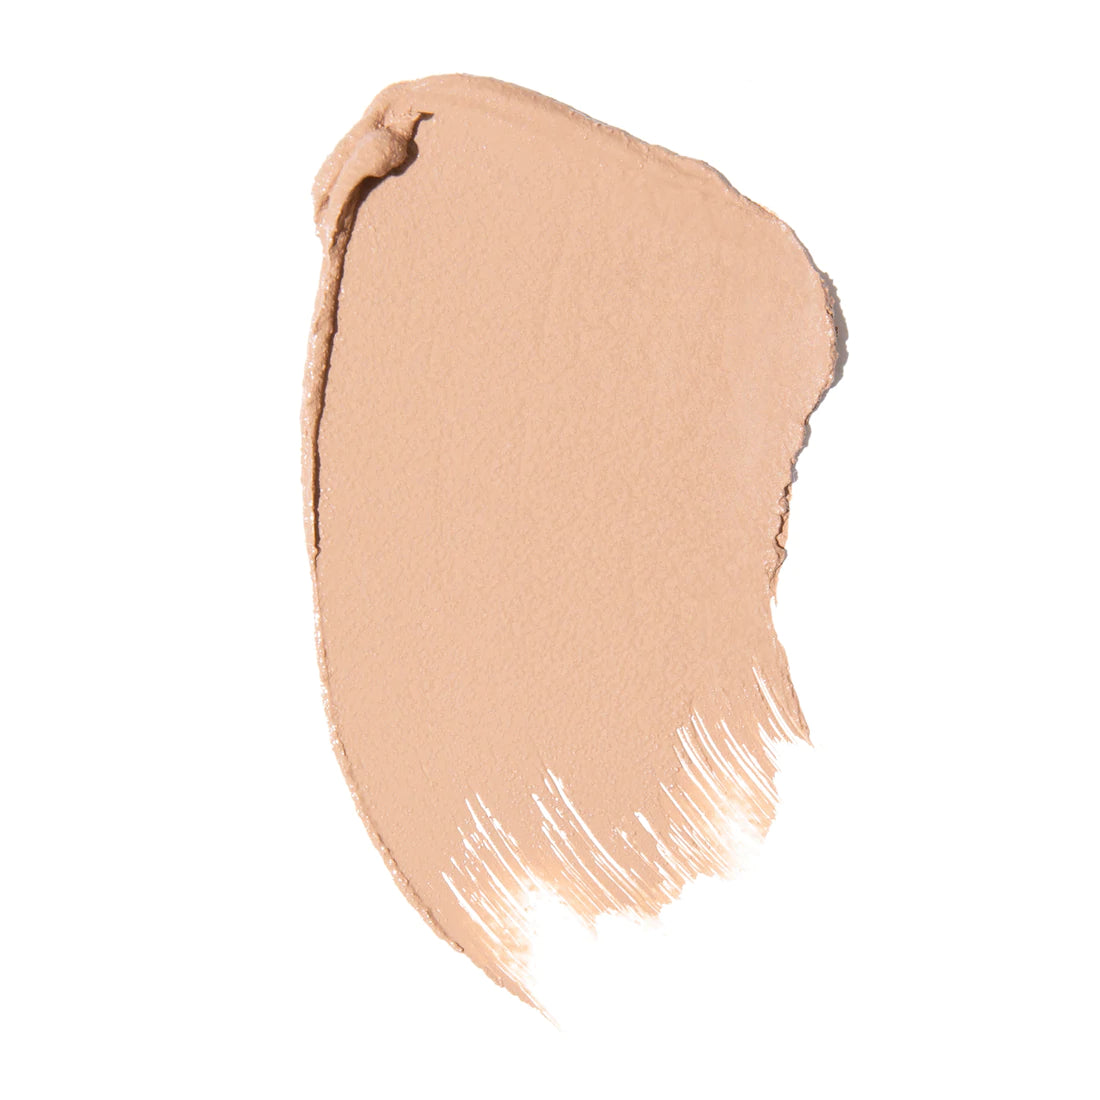 Sample of Cache Cream FAULTLESS - Foundation & Concealer by Carlucce